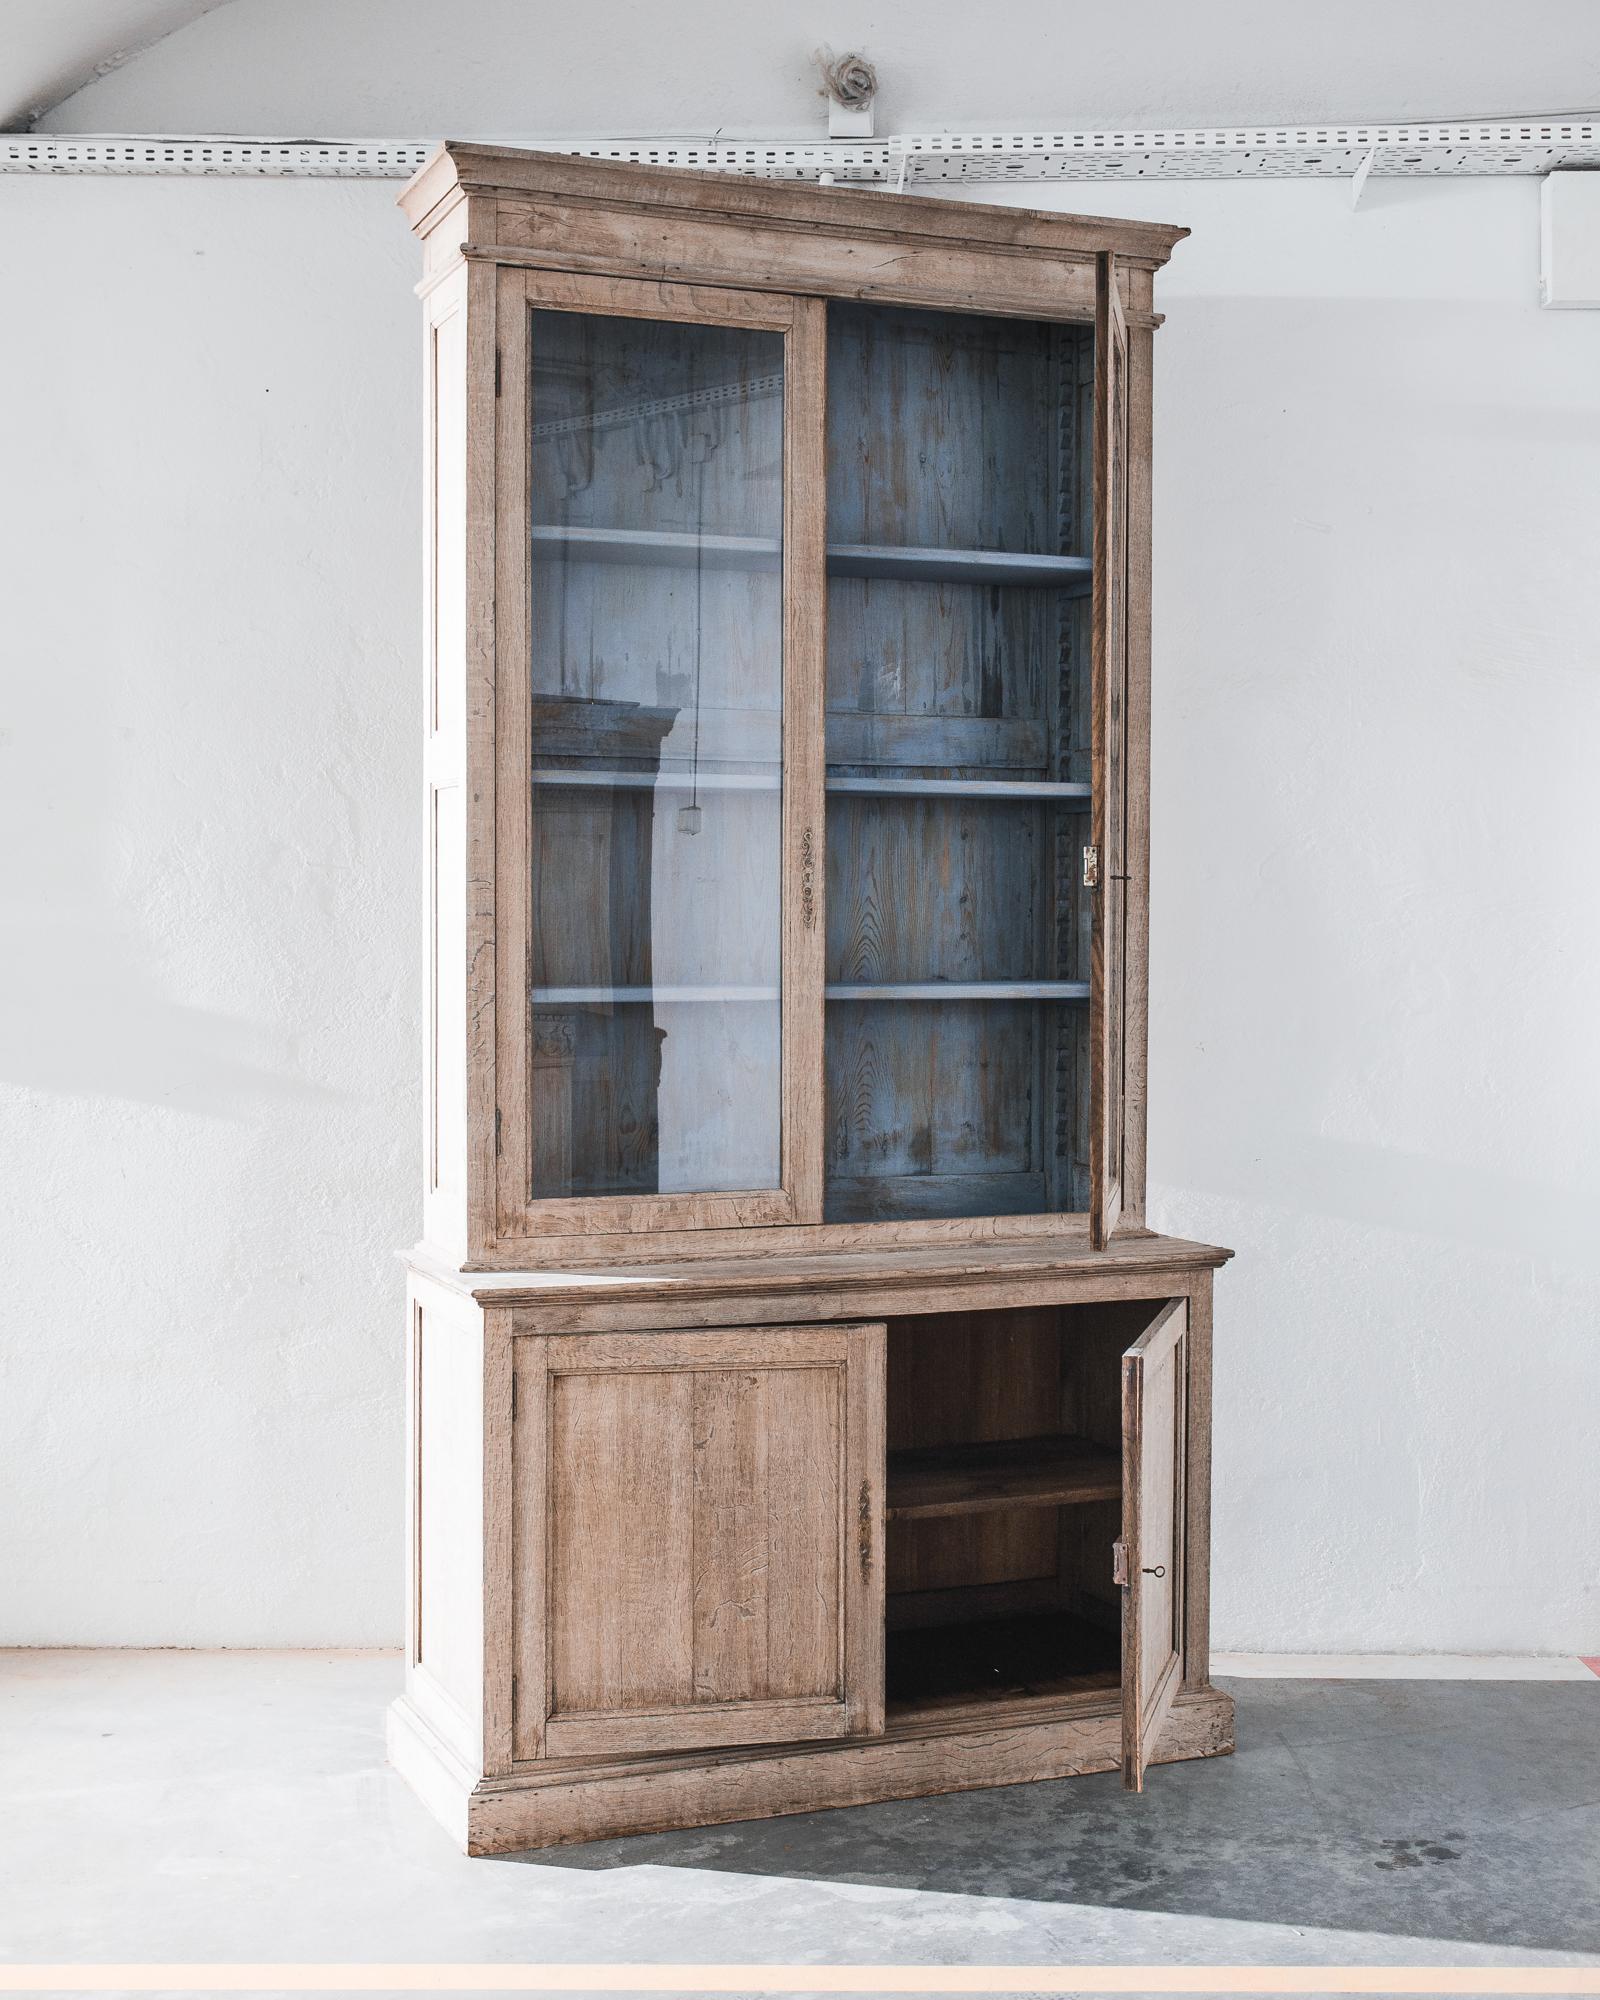 A bleached oak vitrine from France, produced circa 1880. A grand vitrine standing nine feet tall, featuring two levels of cabinets: an upper story fronted by glass with a gray patinated interior of four shelves, and a lower double cabinet of two